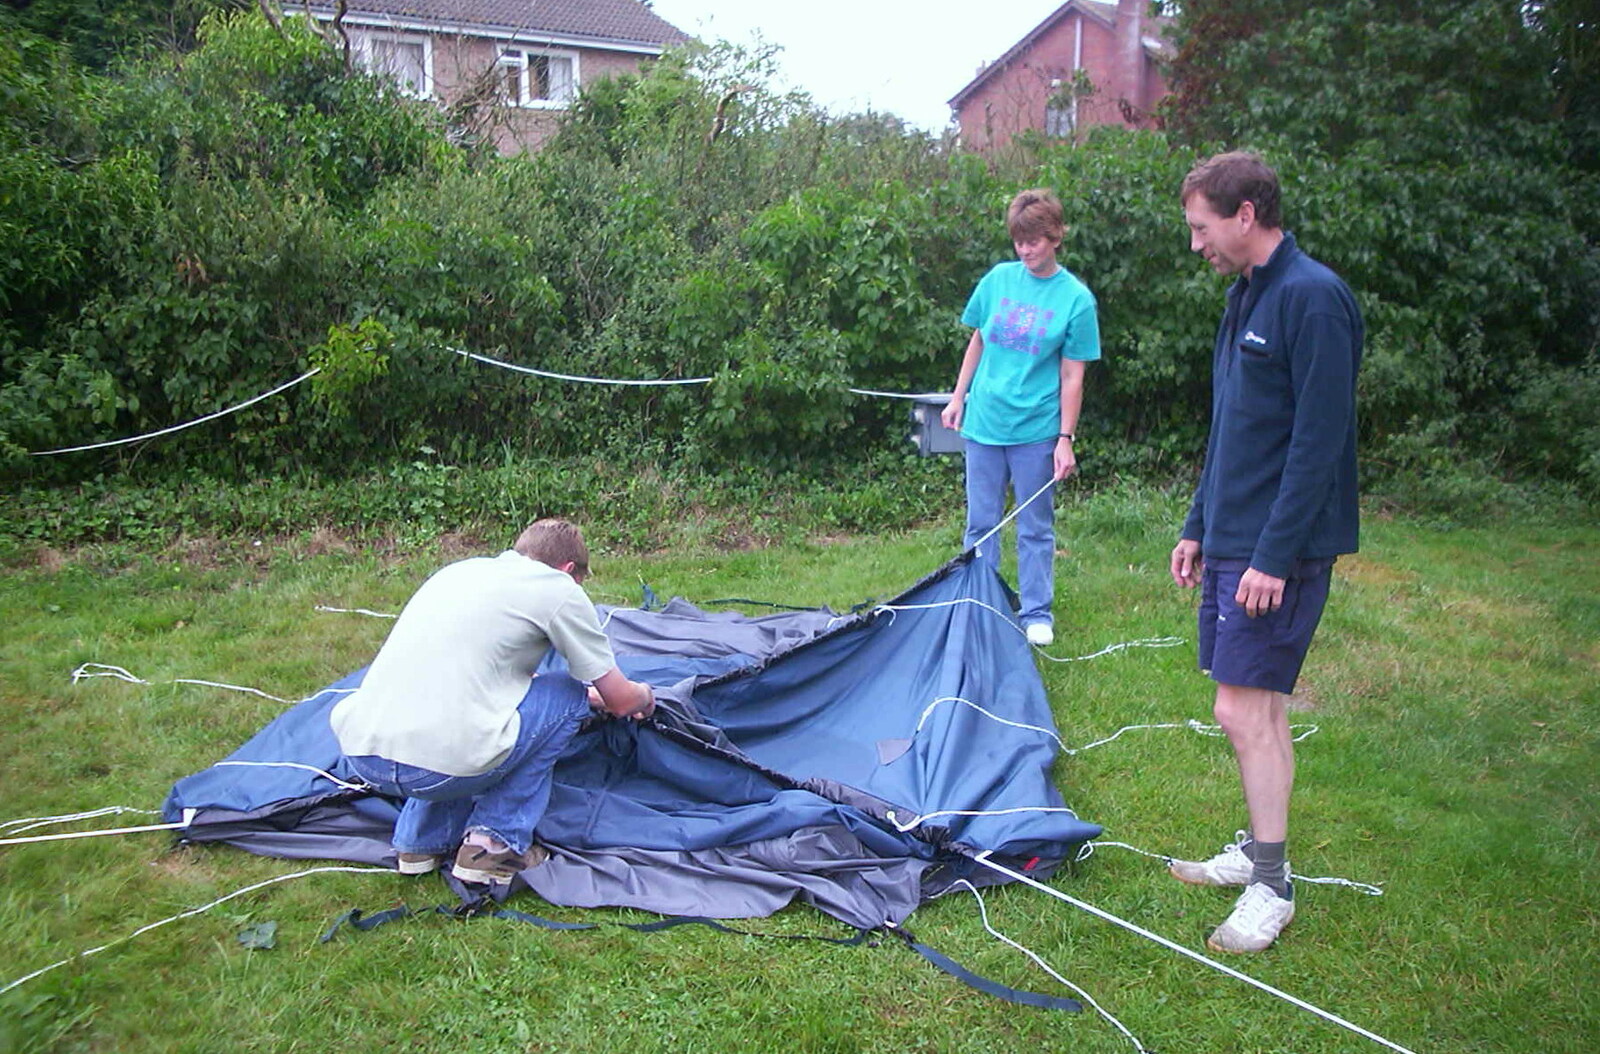 A BSCC Splinter Group Camping Weekend, Theberton, Suffolk - 11th August 2002: Tents are deconstructed